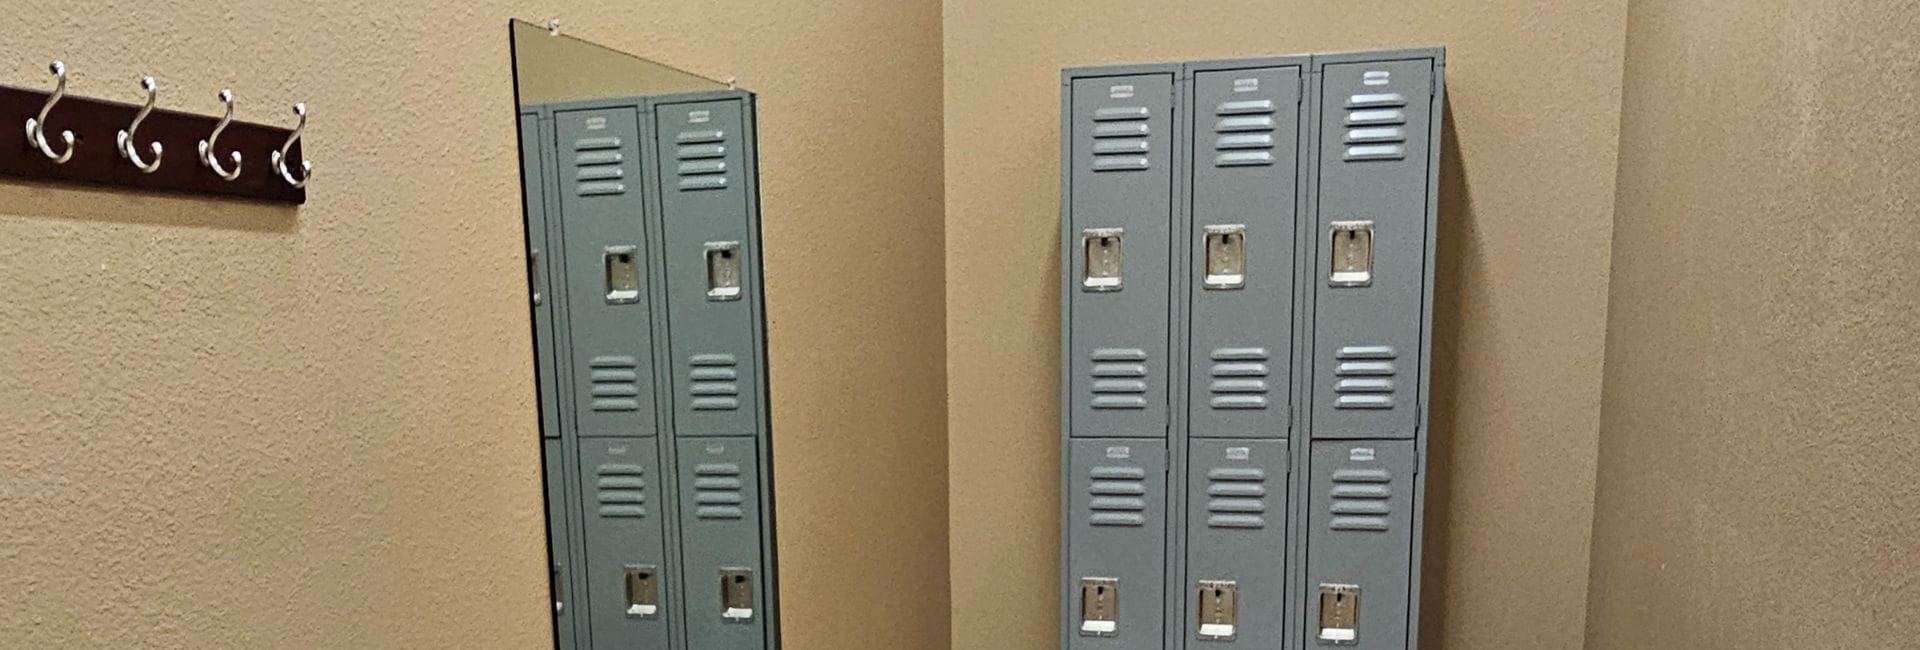 Gym lockers at a gym in Albuquerque Midtown